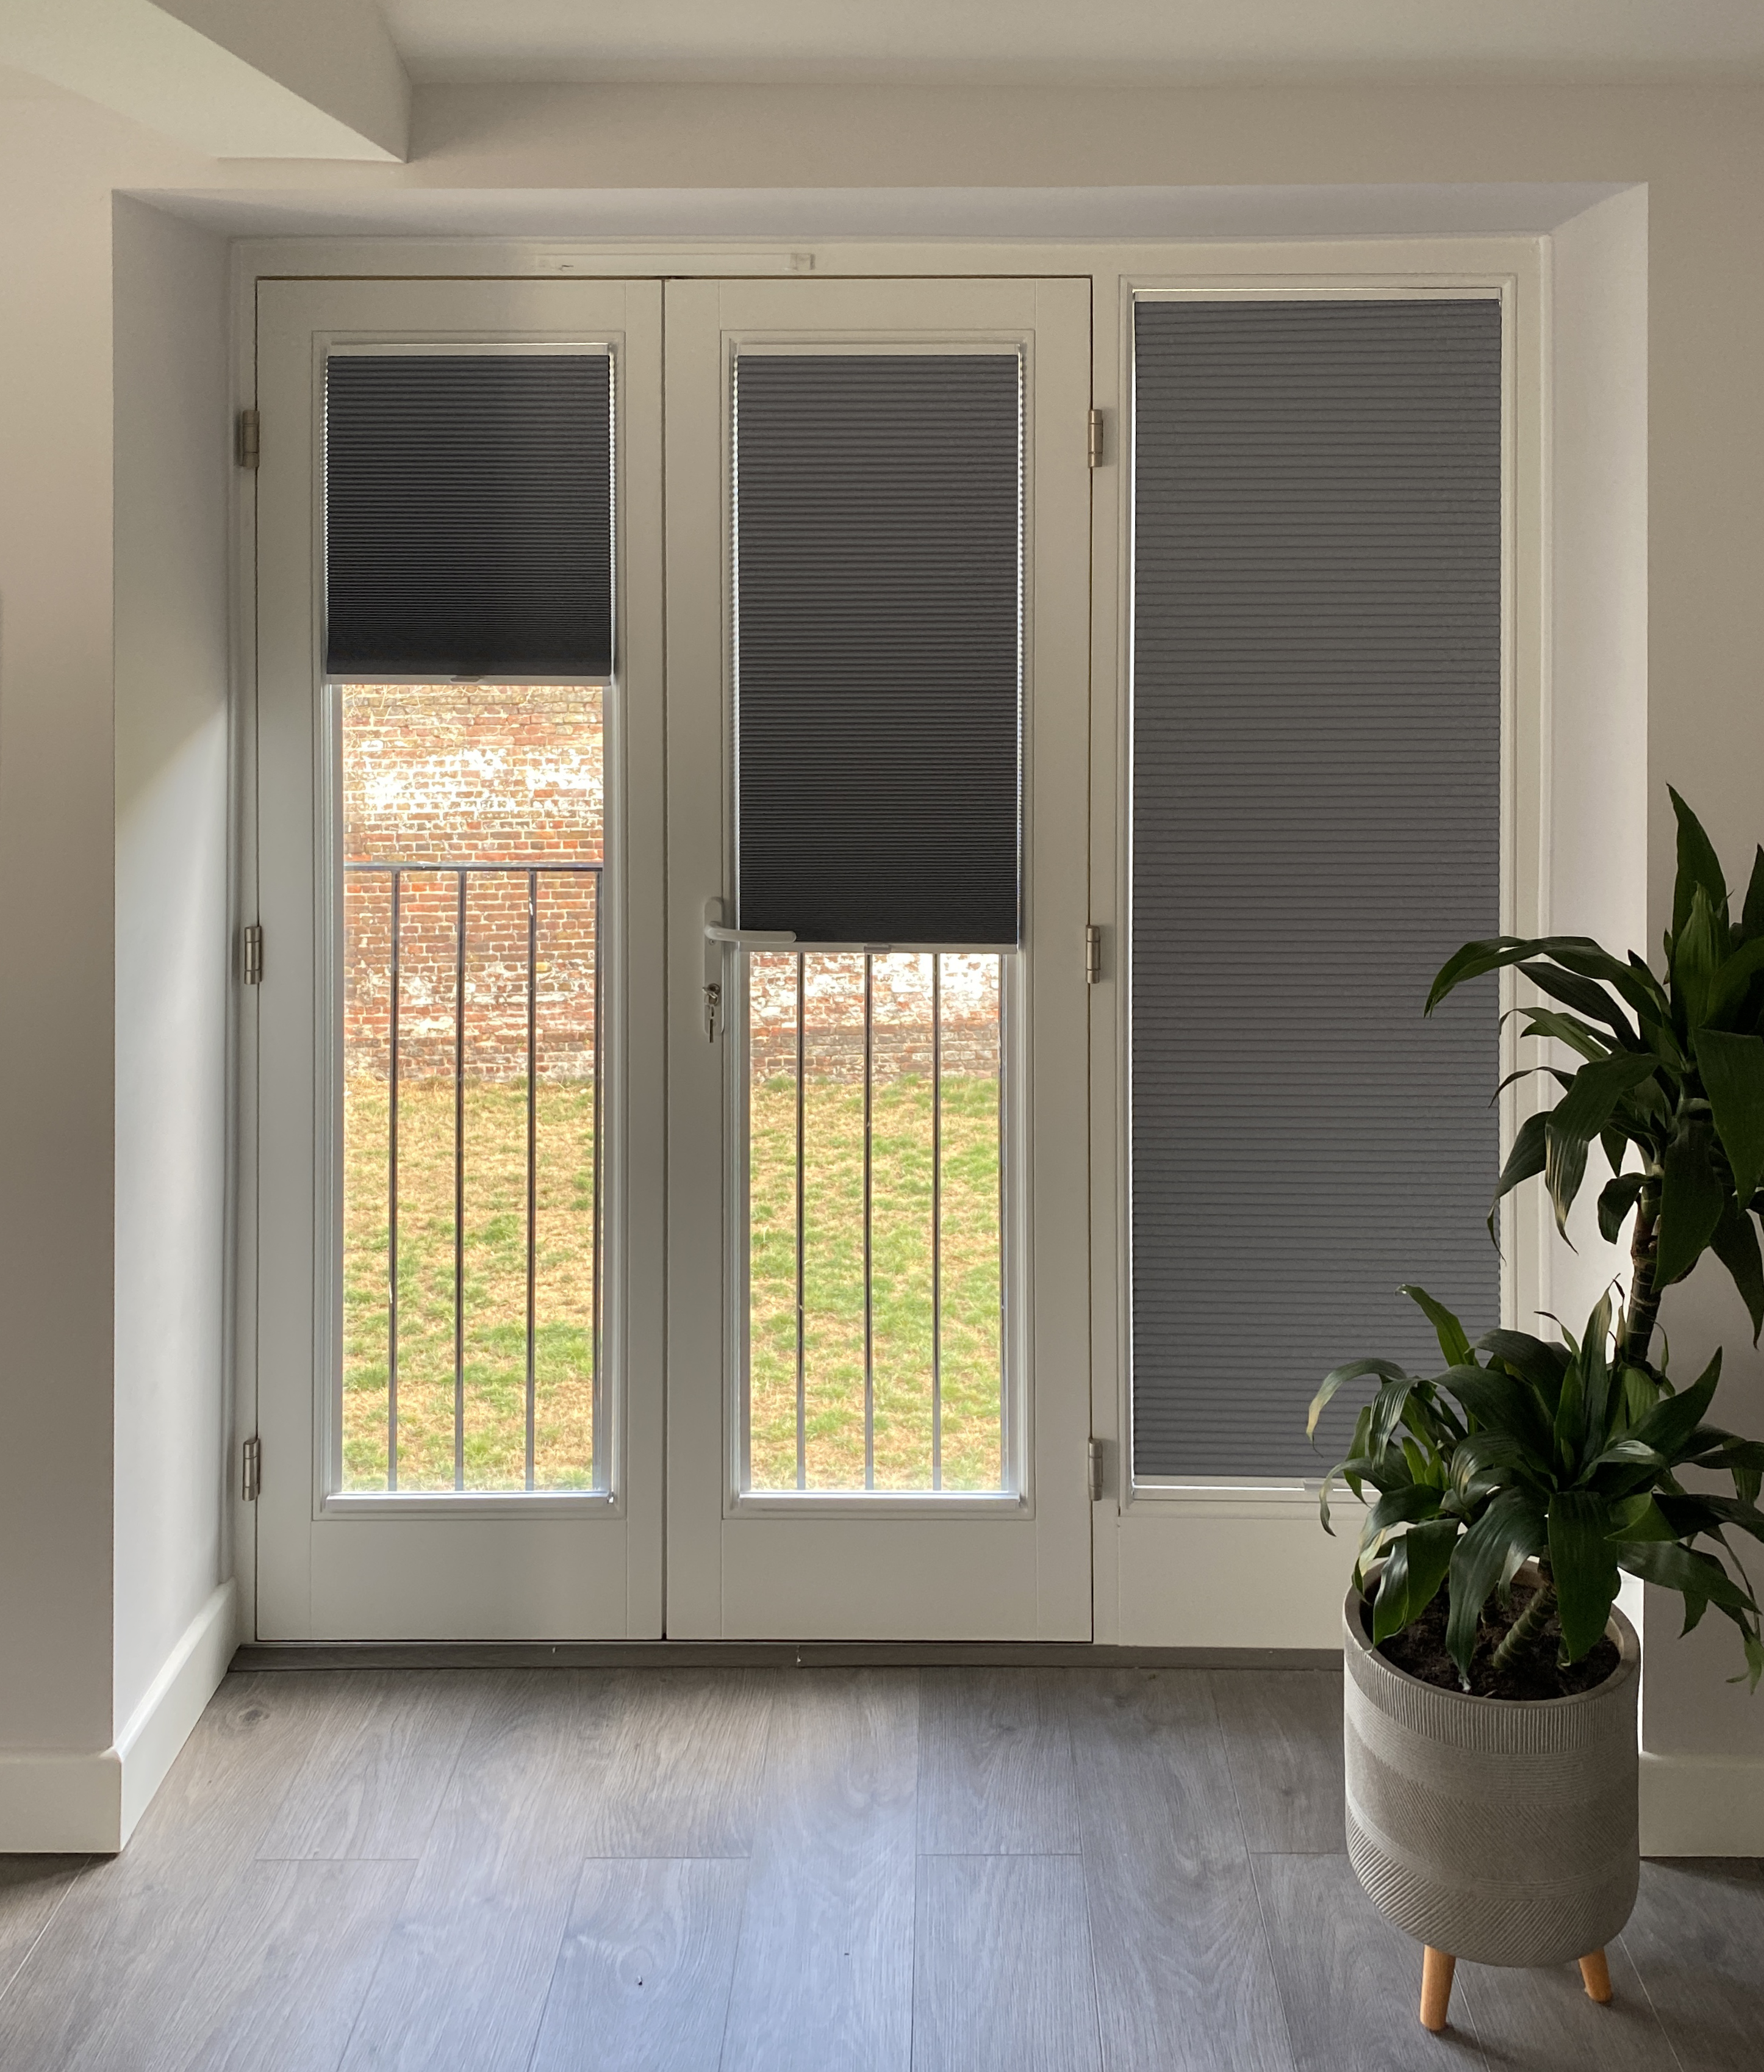 Bespoke Blinds from Elite Blinds and Shutters